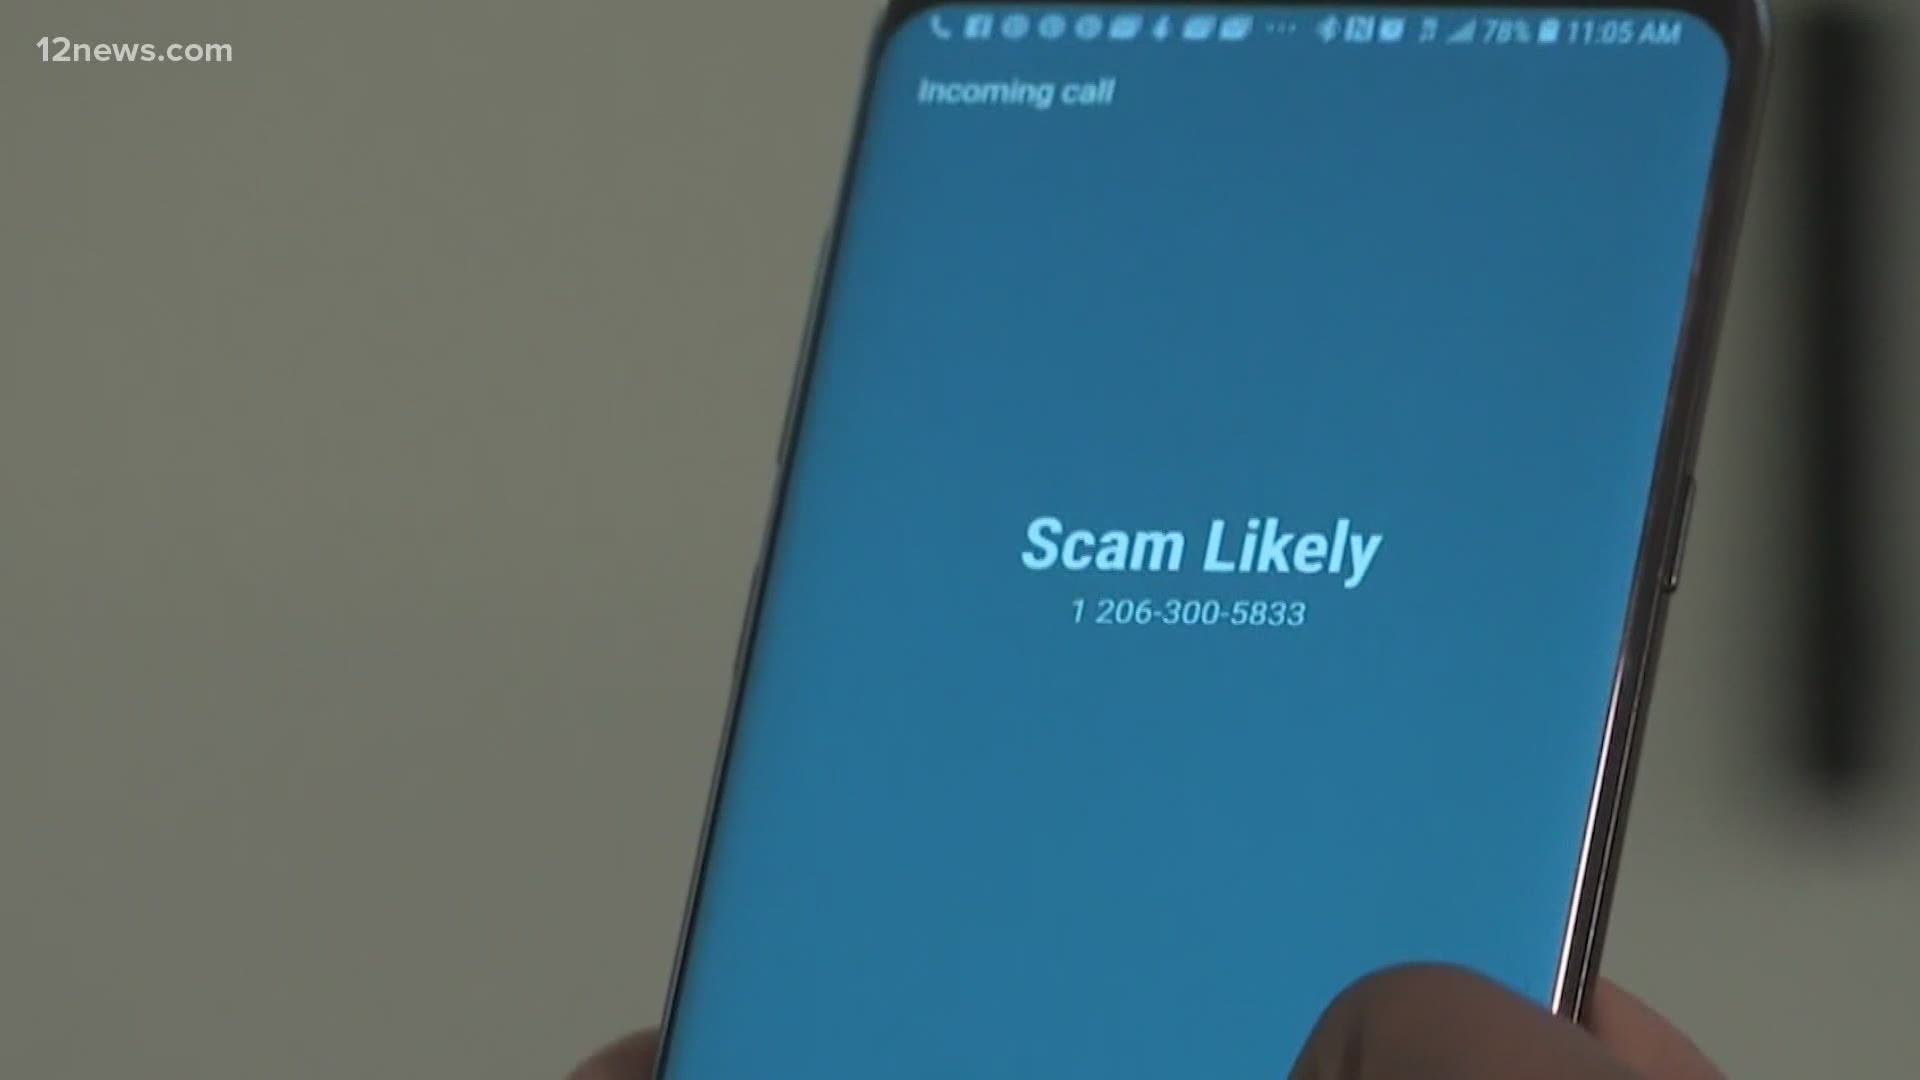 Katie Connor with the Arizona Attorney General's office says phone scams are some of the top complaints when it comes to COVID-19.